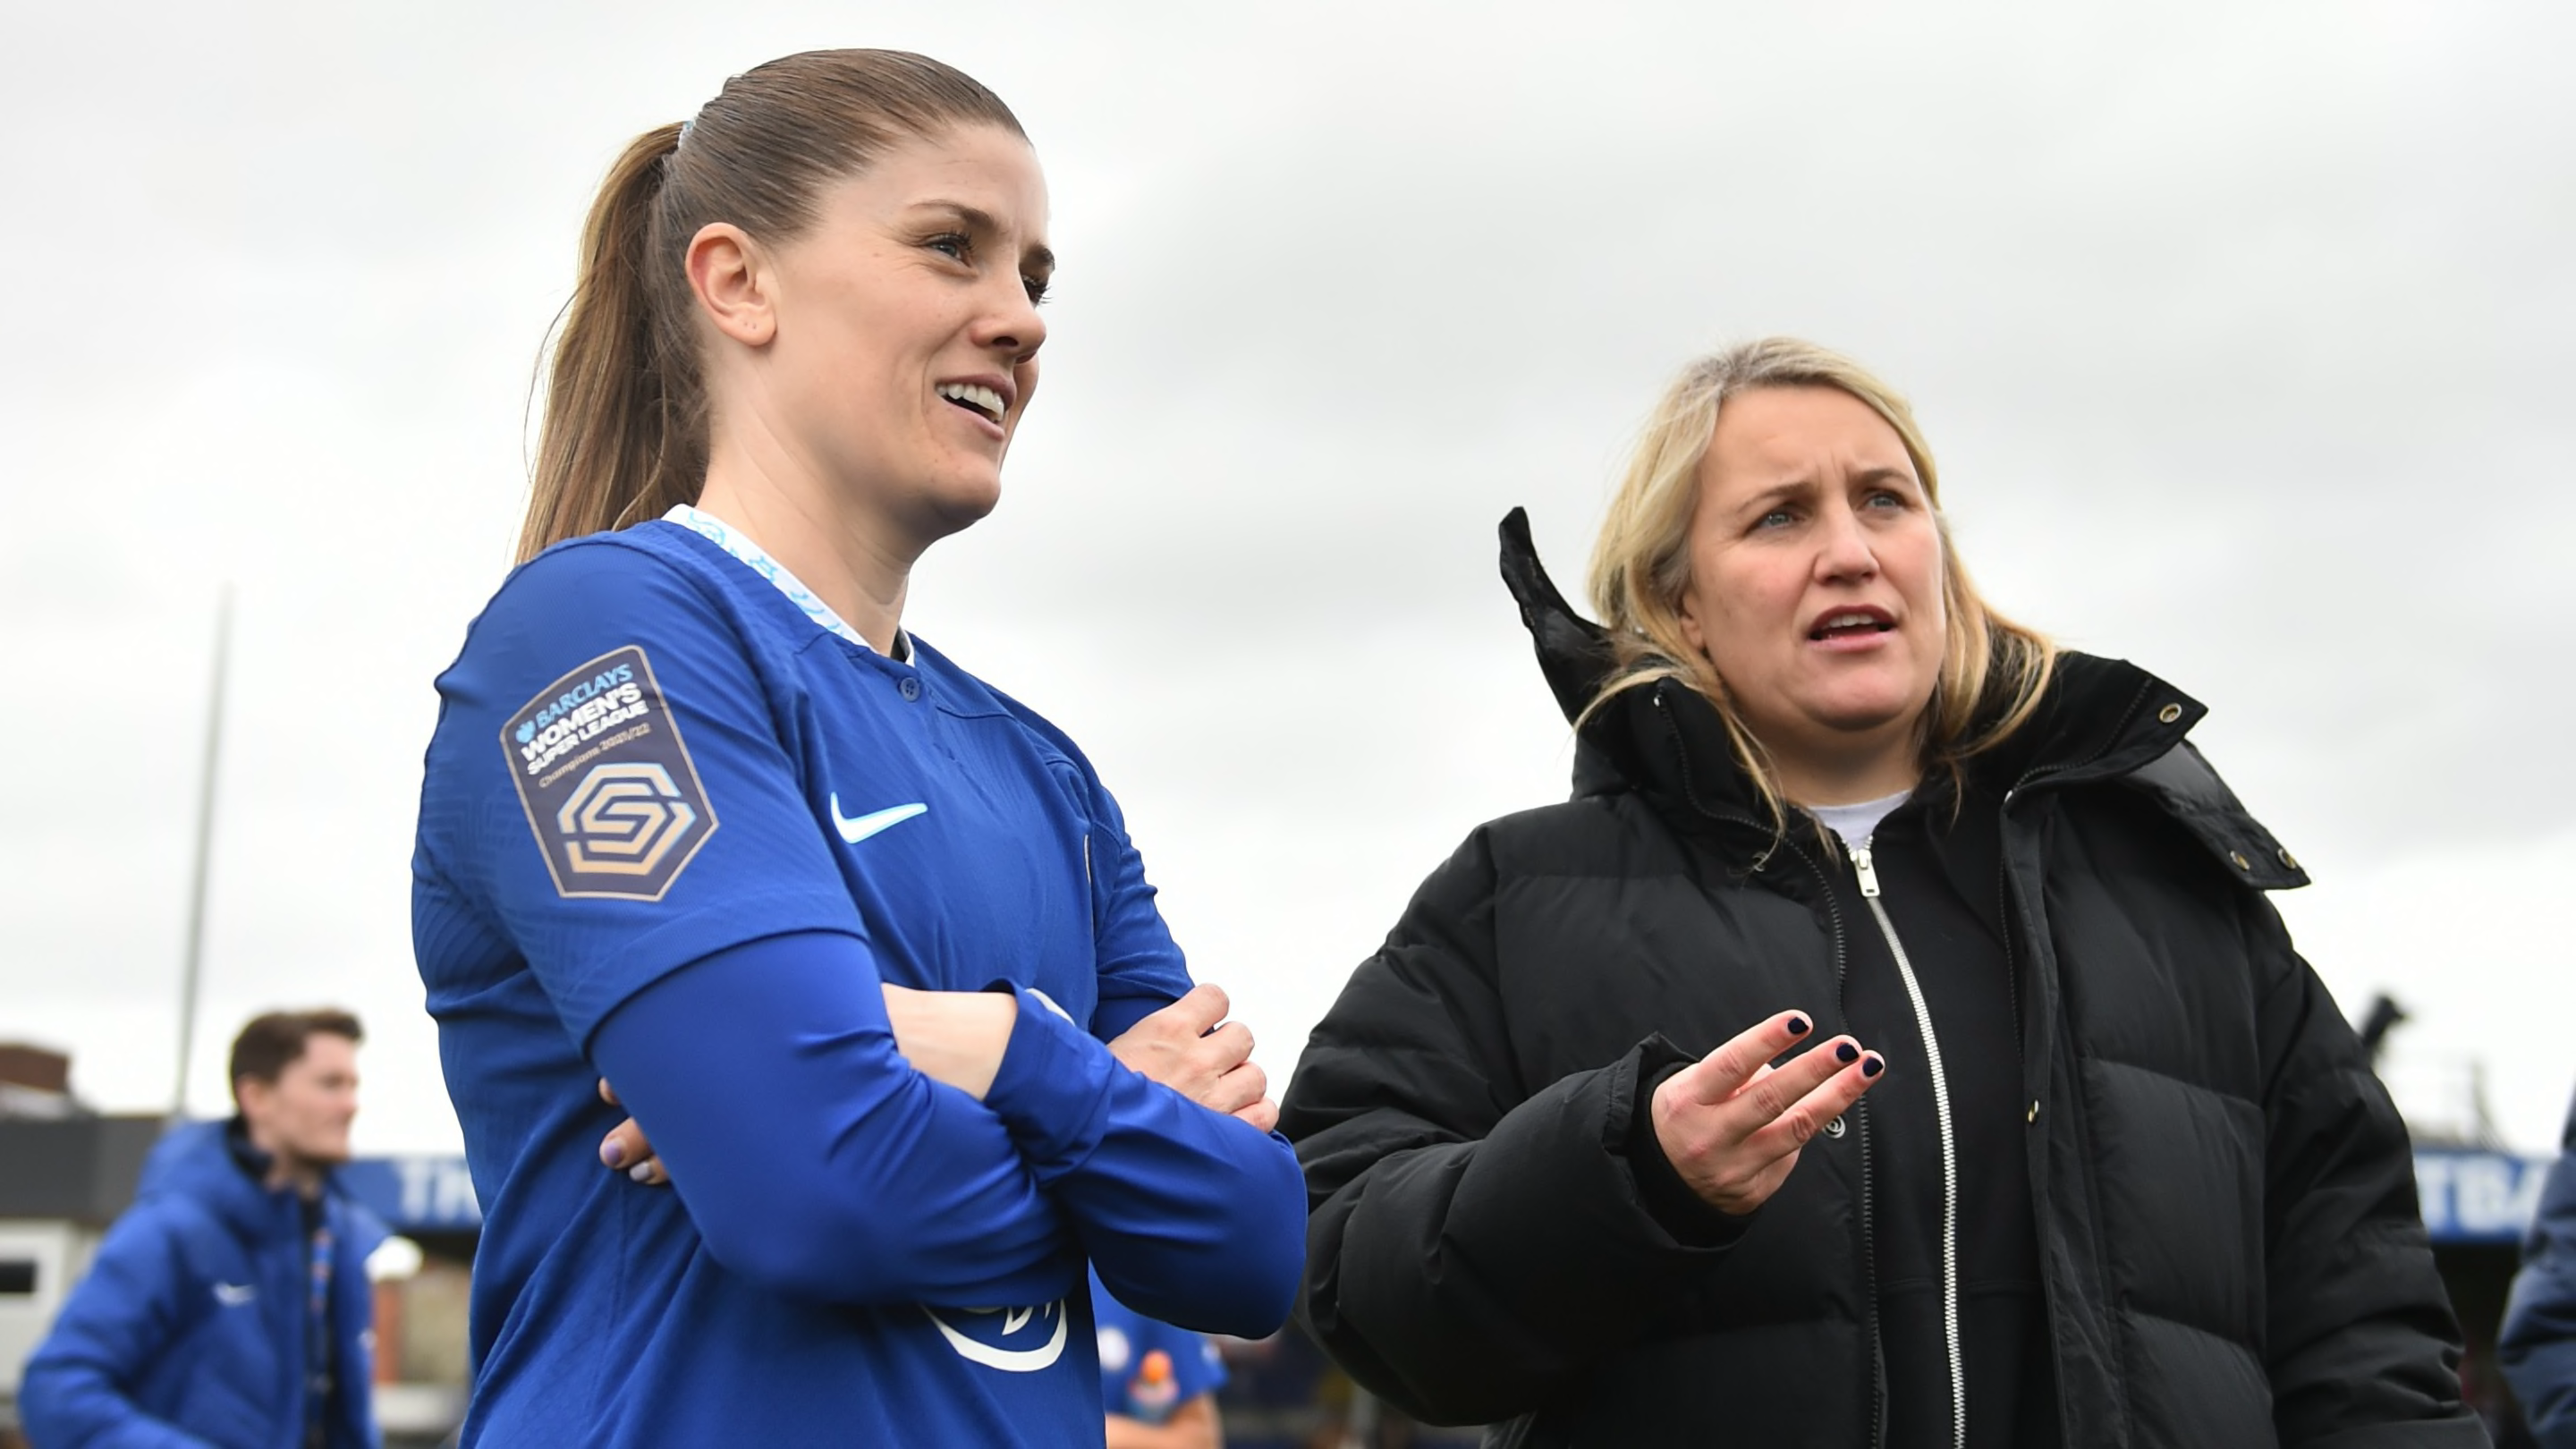 How Chelsea made vital use of squad depth in Women's FA Cup quarter-final win